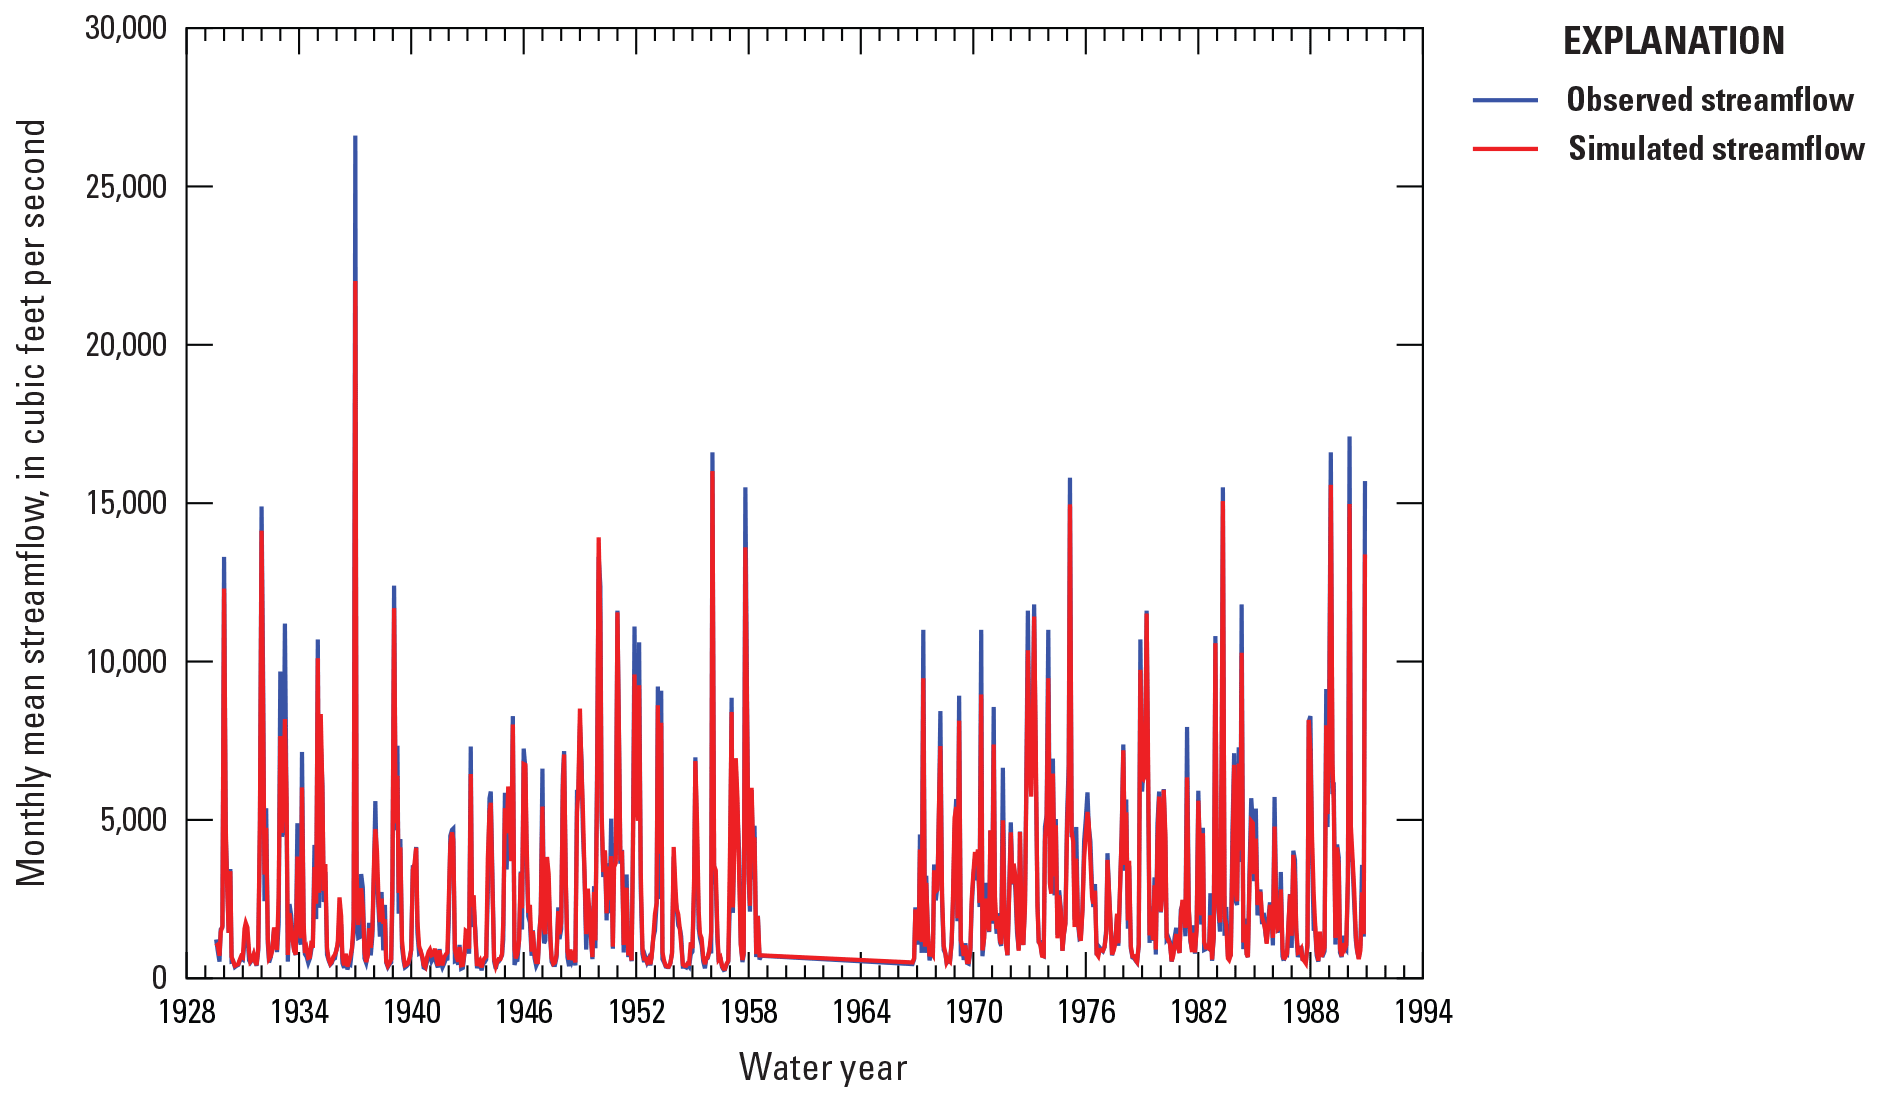 Observed and simulated monthly mean streamflow hydrographs show similar magnitudes.